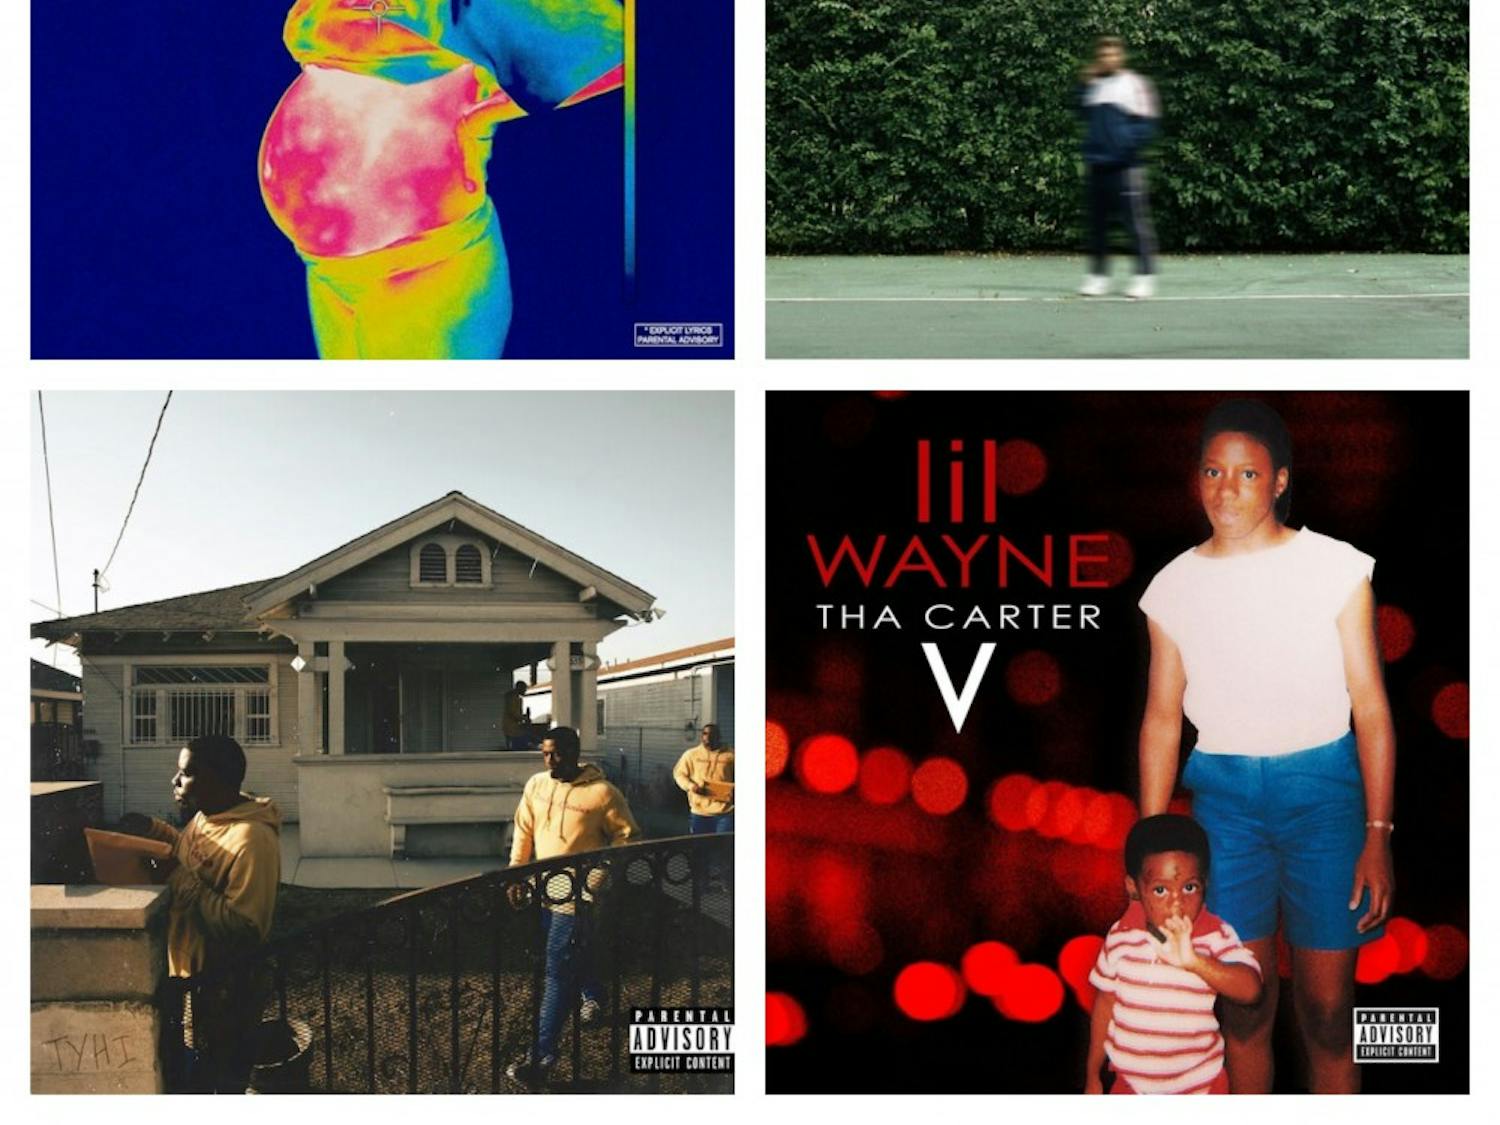 Collage consists of album covers from BROCKHAMPTON, Joey Purp, Reason and Lil Wayne.&nbsp;